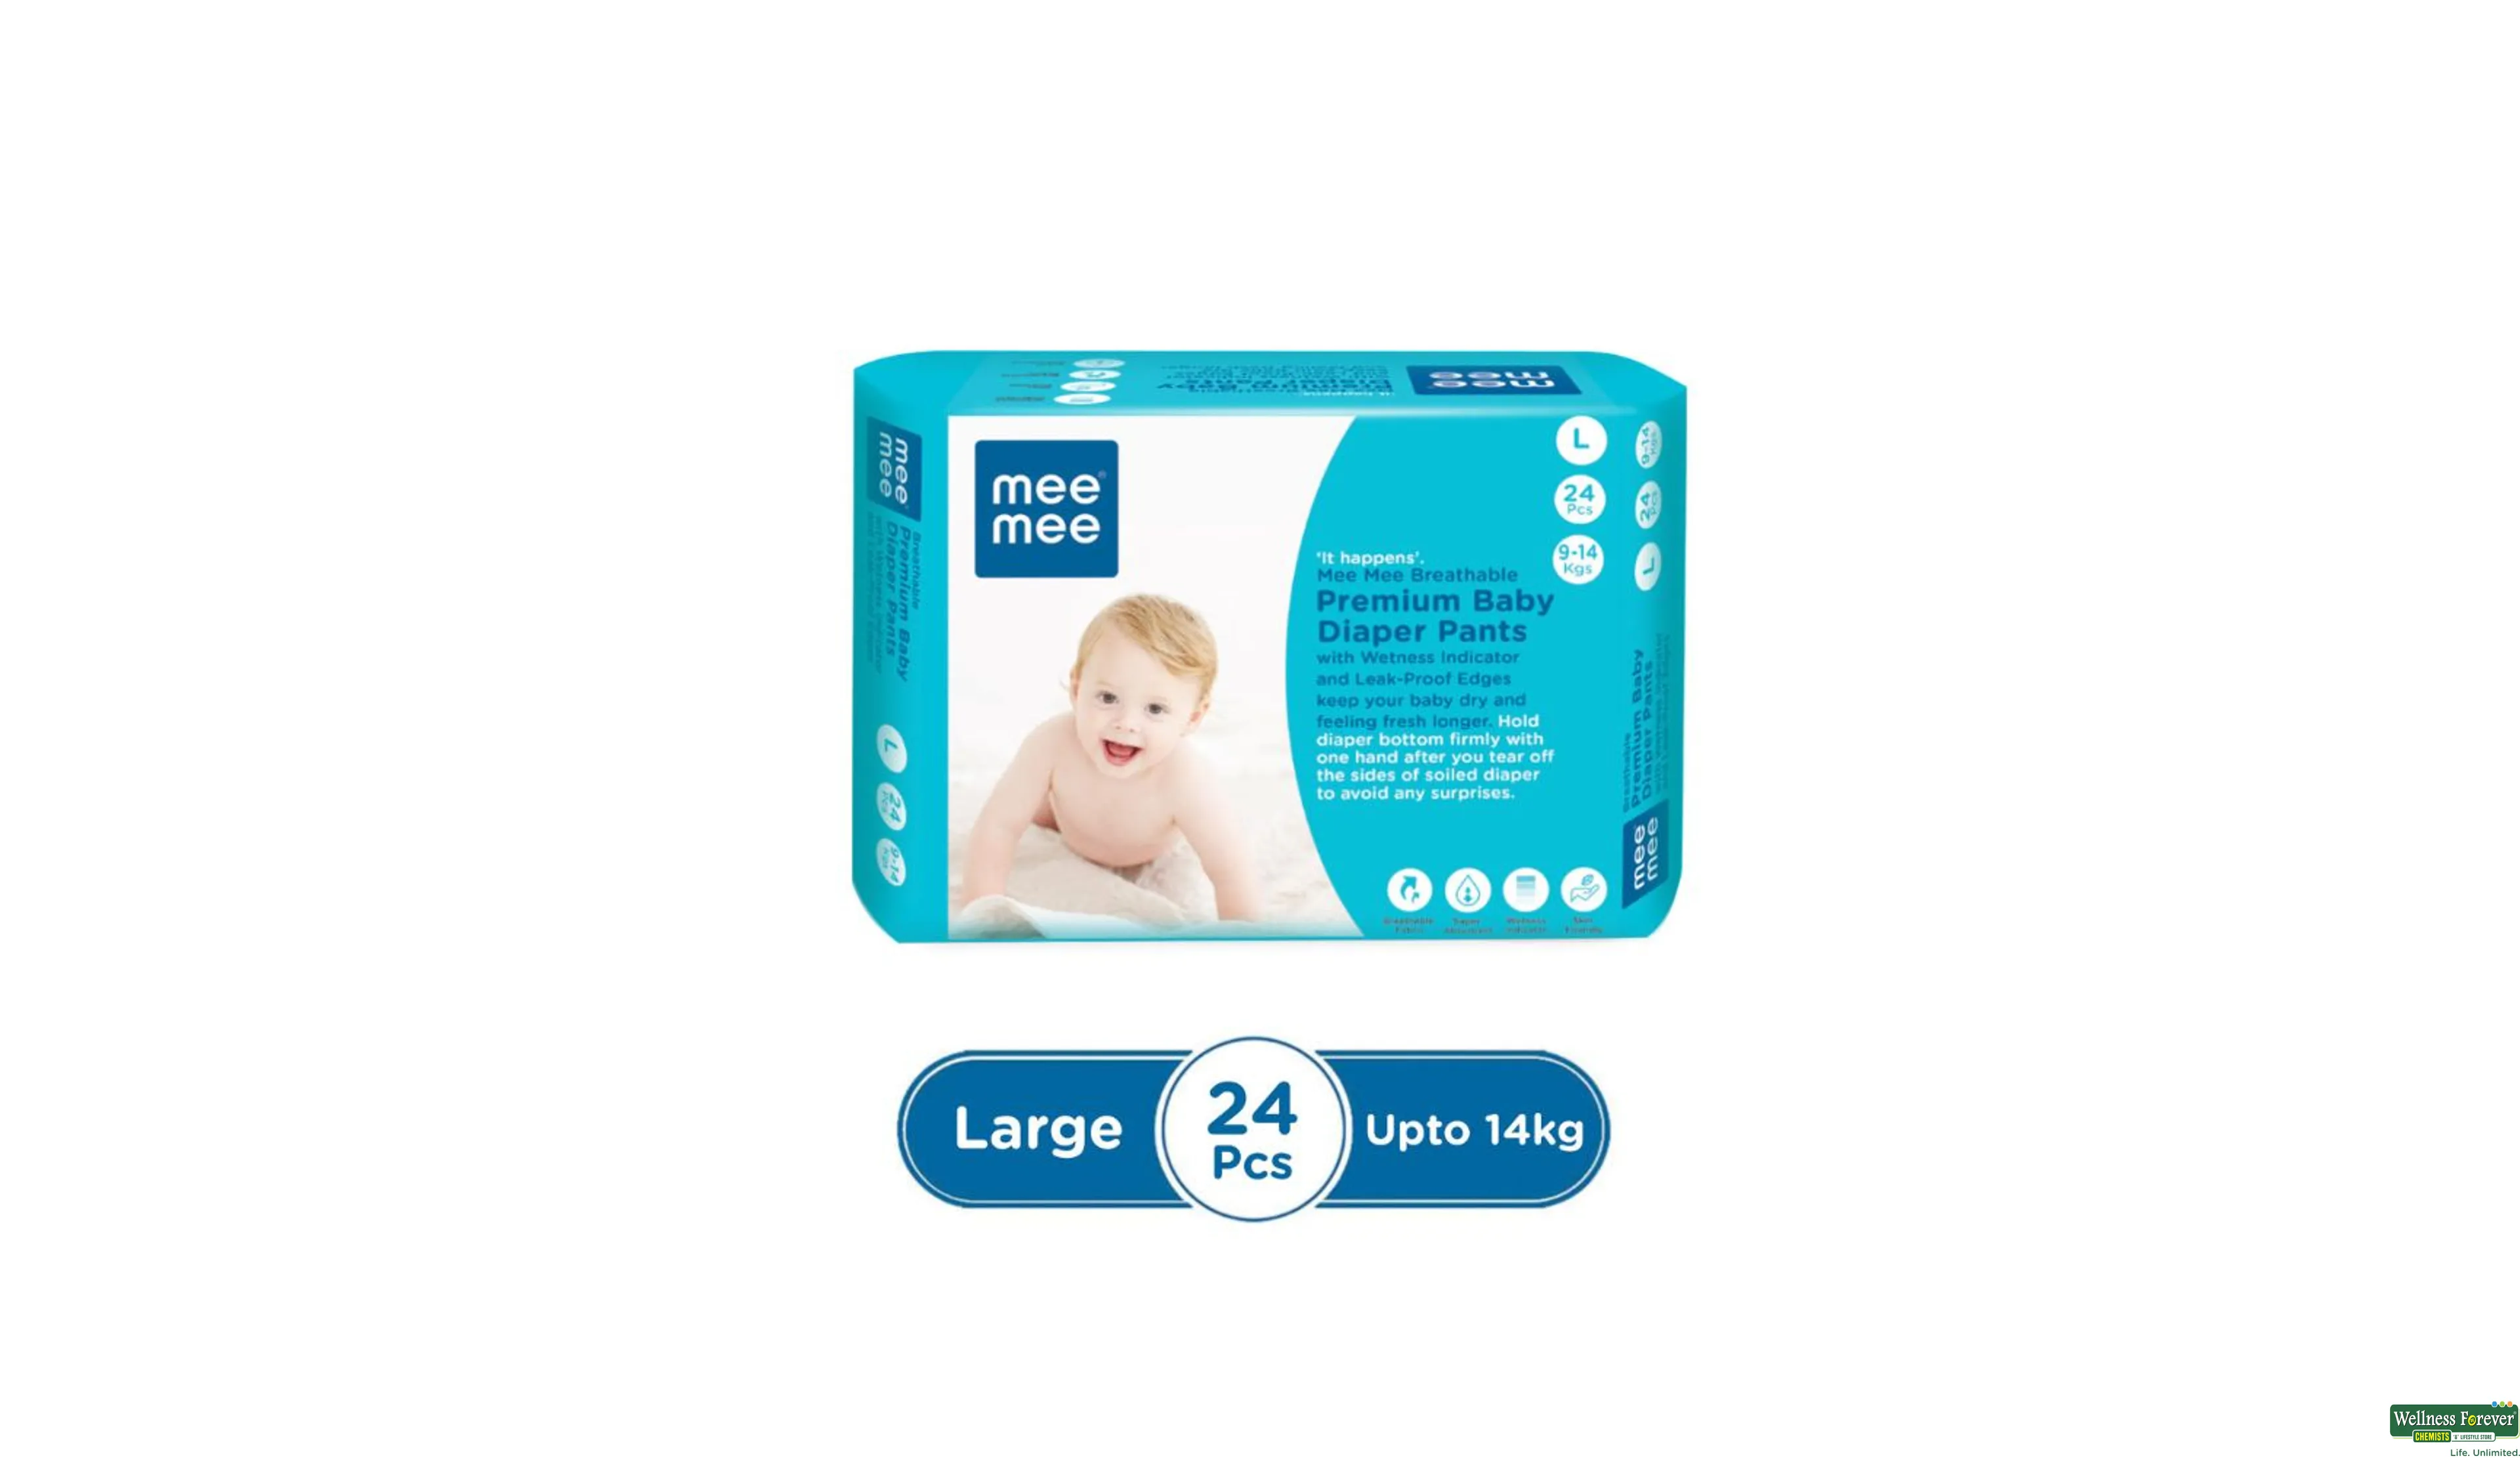 Mee Mee Premium Breathable Baby Small Taped Diapers |Skin Friendly, Super  Absorbent, Cotton Soft With Wetness Indicator|Protection Upto 12 Hrs For